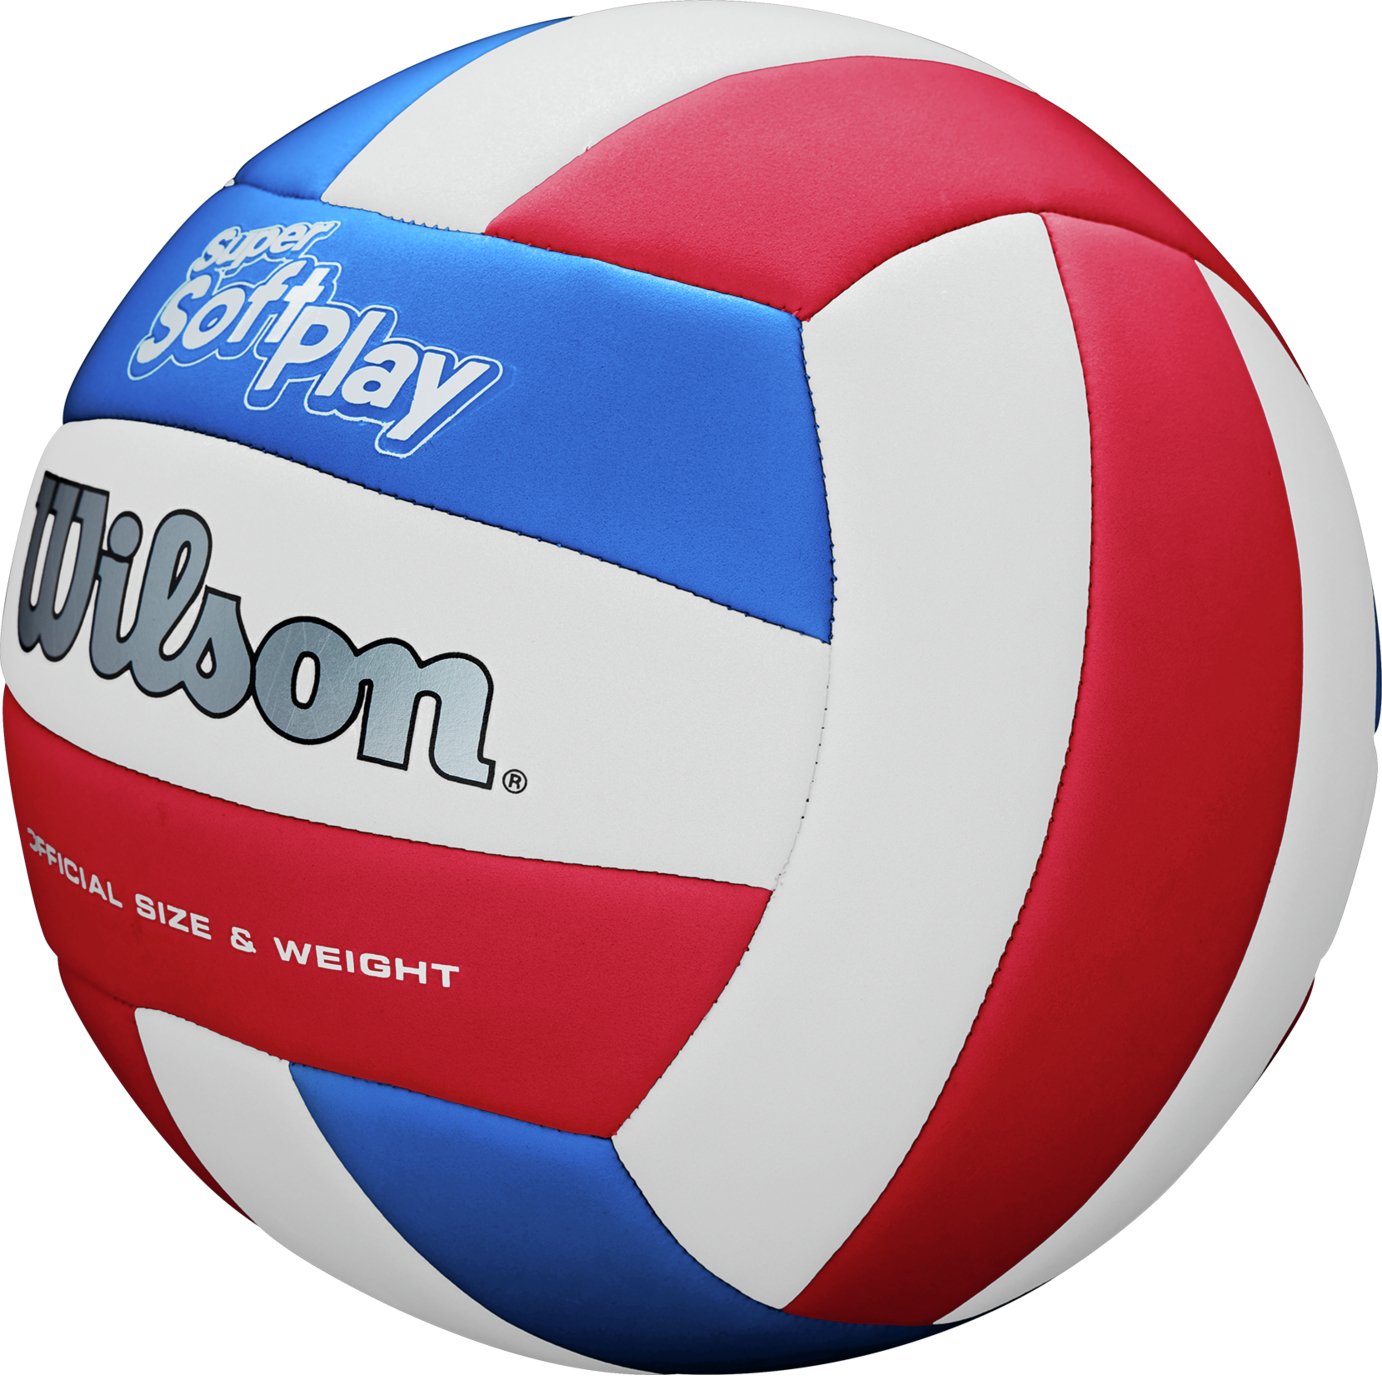 Wilson Soft Play Volleyball Review